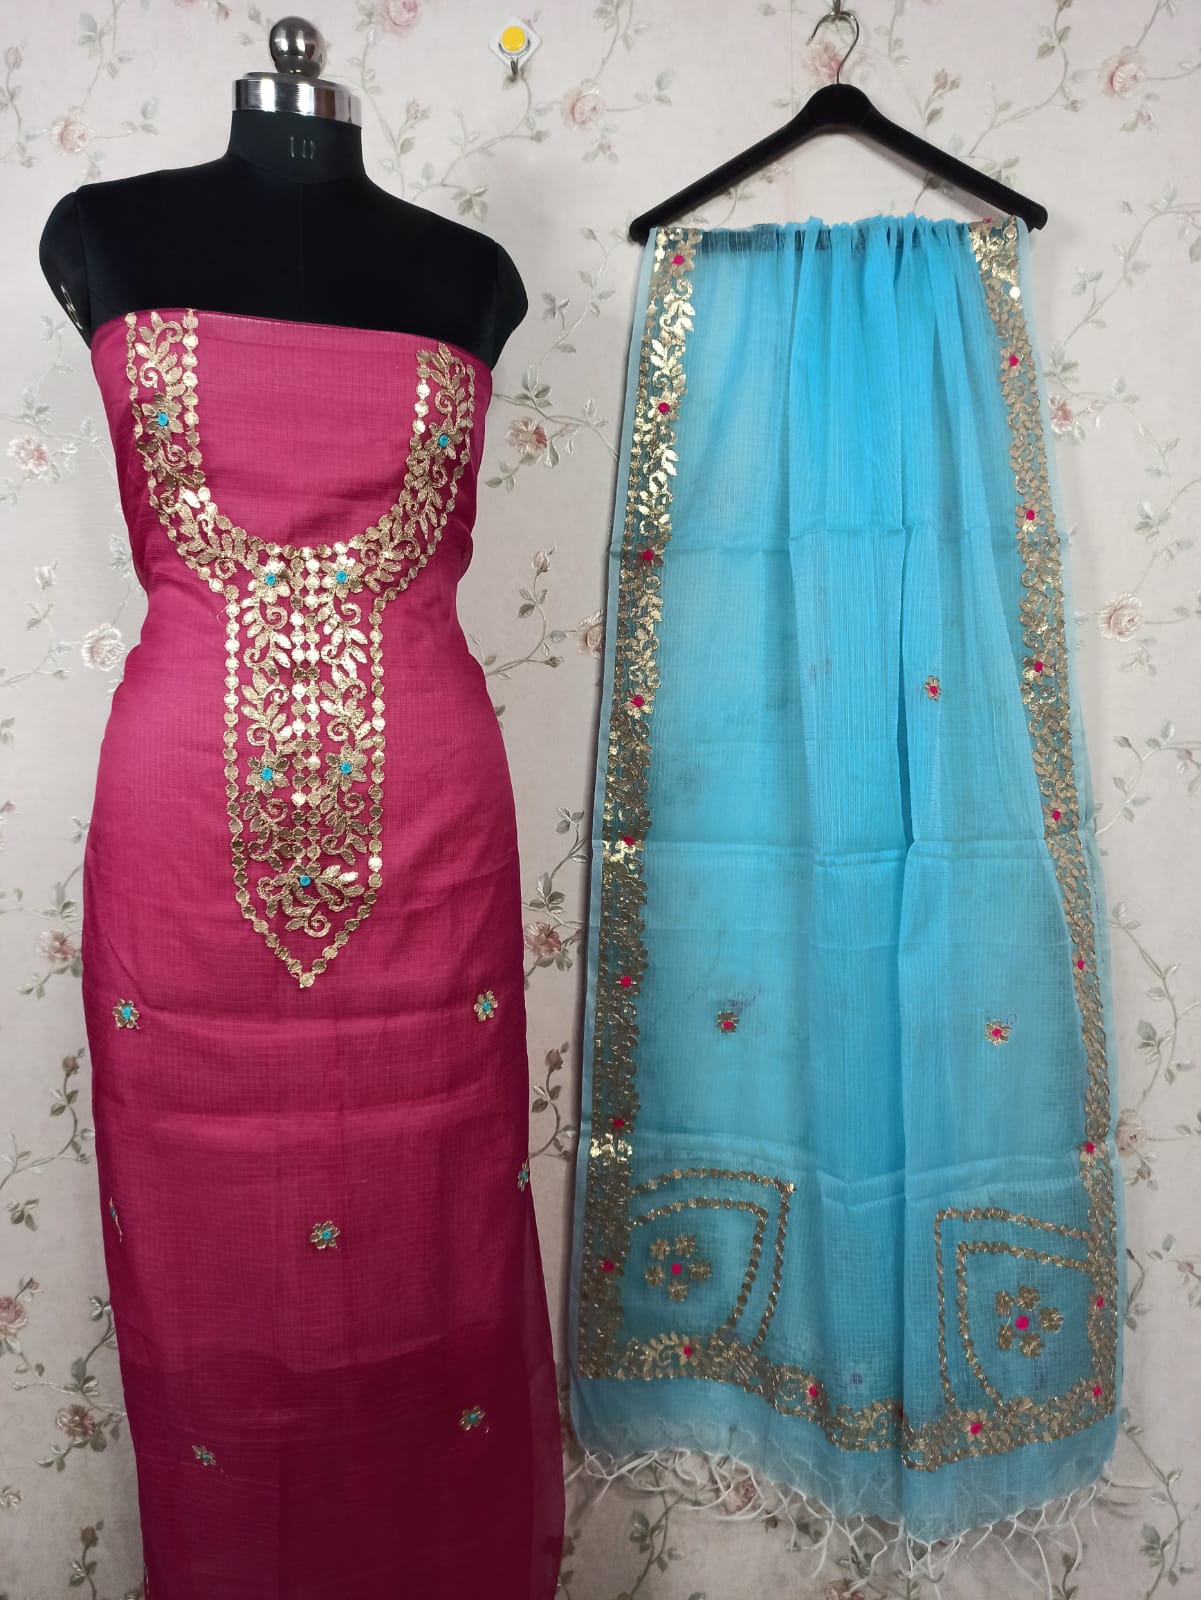 Kota Doriya Embroidery Work Suit In pink and blue